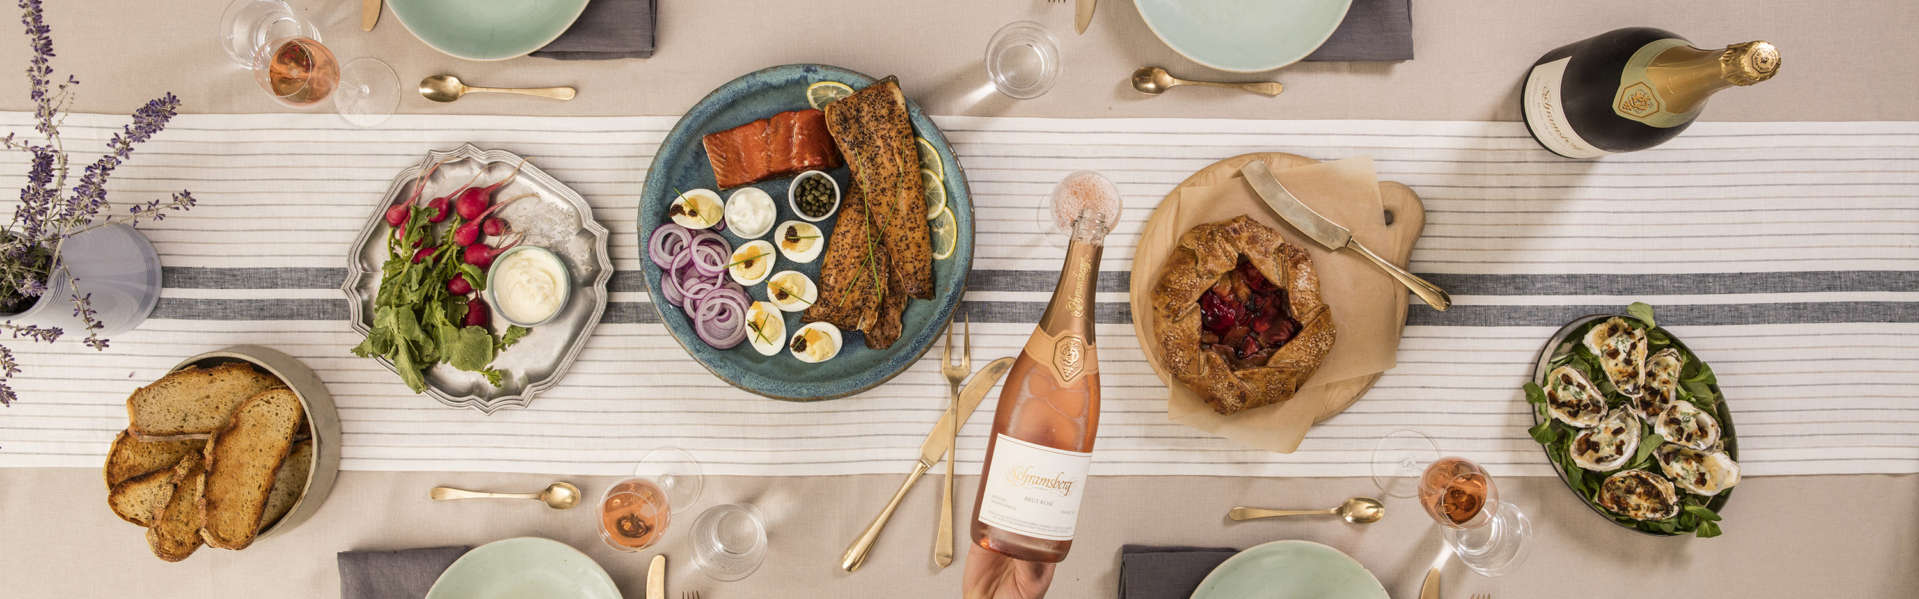 Brut Rosé and Blanc de Blancs paired with oysters, radishes with dip, roast salmon and fruit galette.